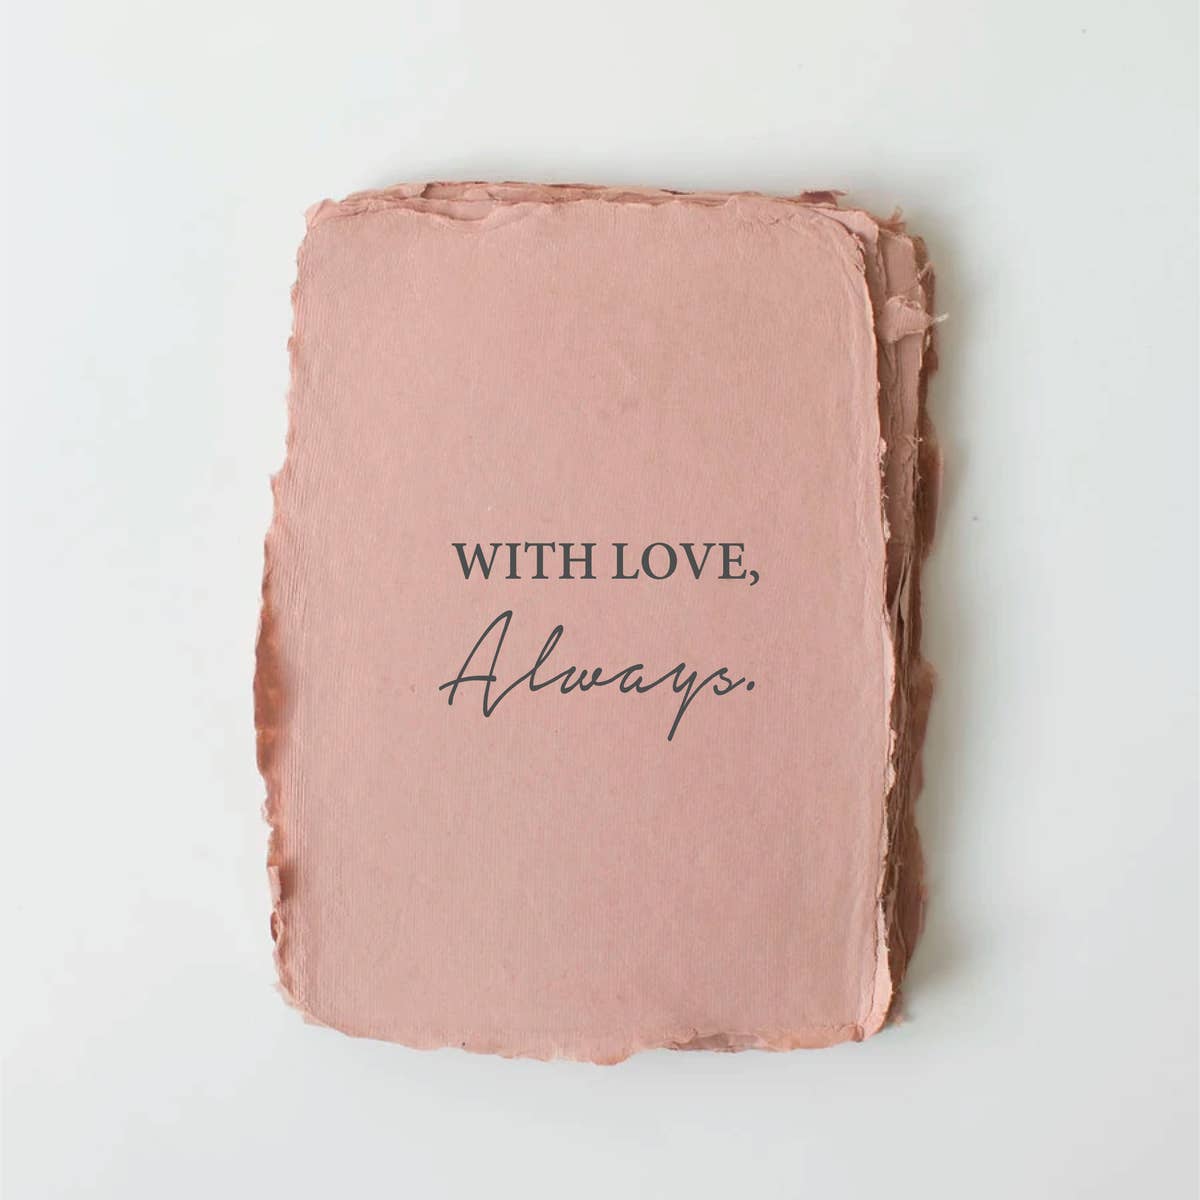 "With love always" greeting card by Paper Baristas